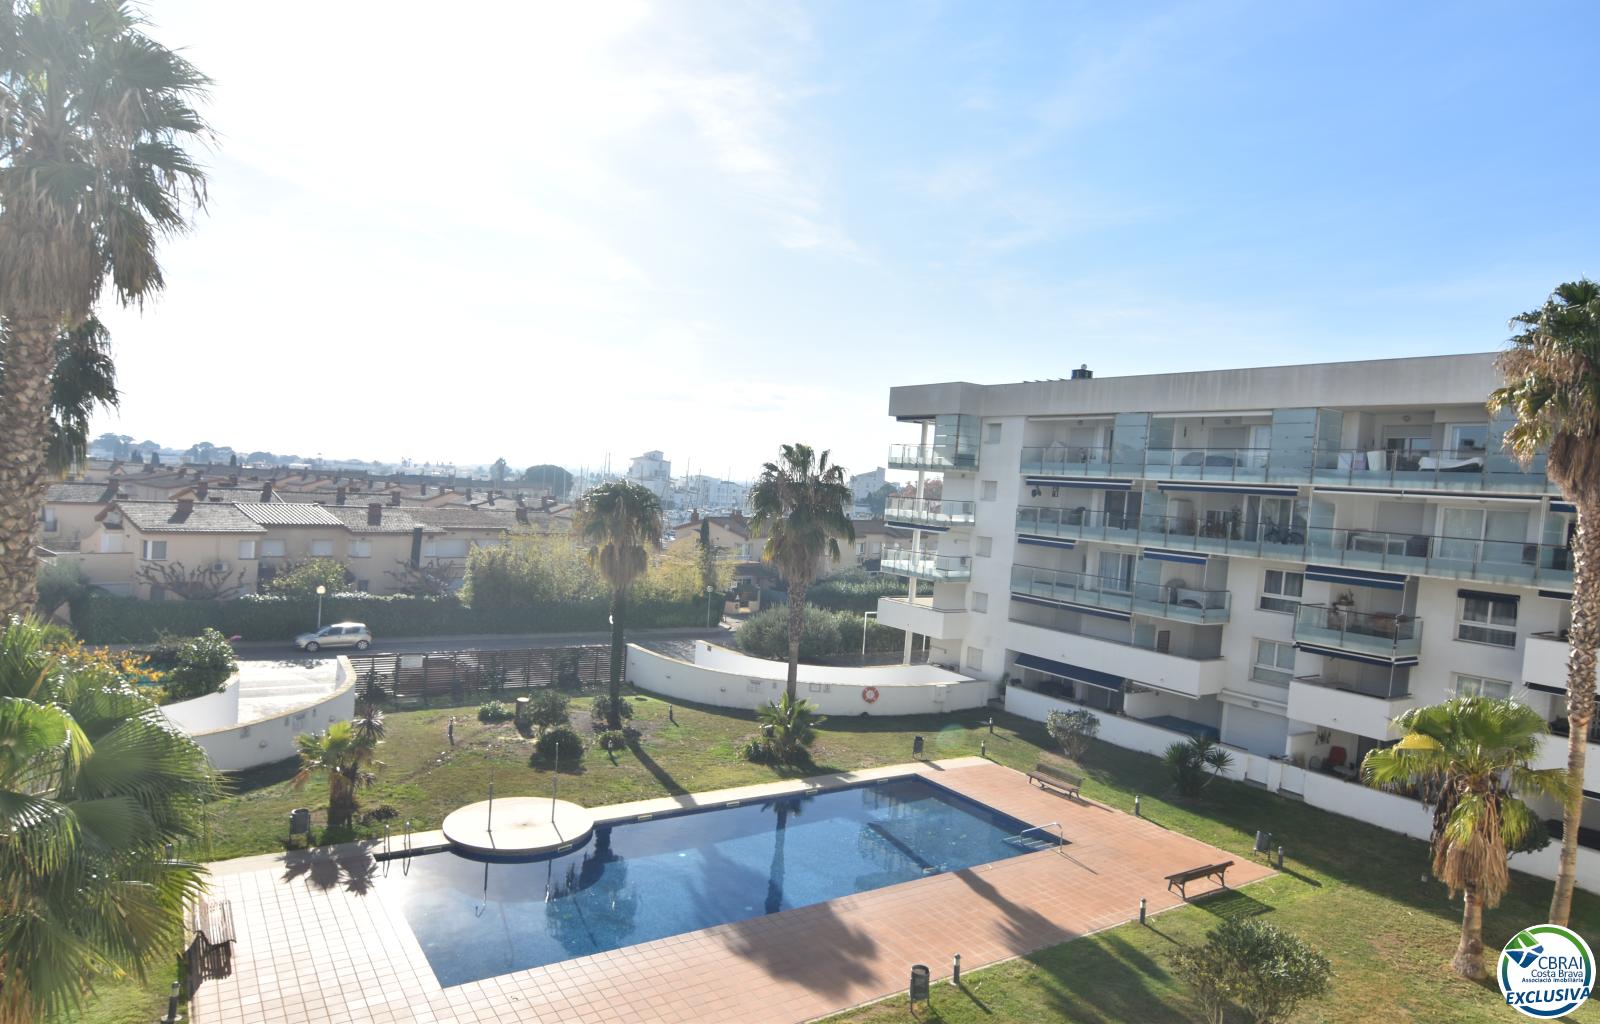 Apartment located in Roses, Santa Margarita, with parking and private underground storage room.